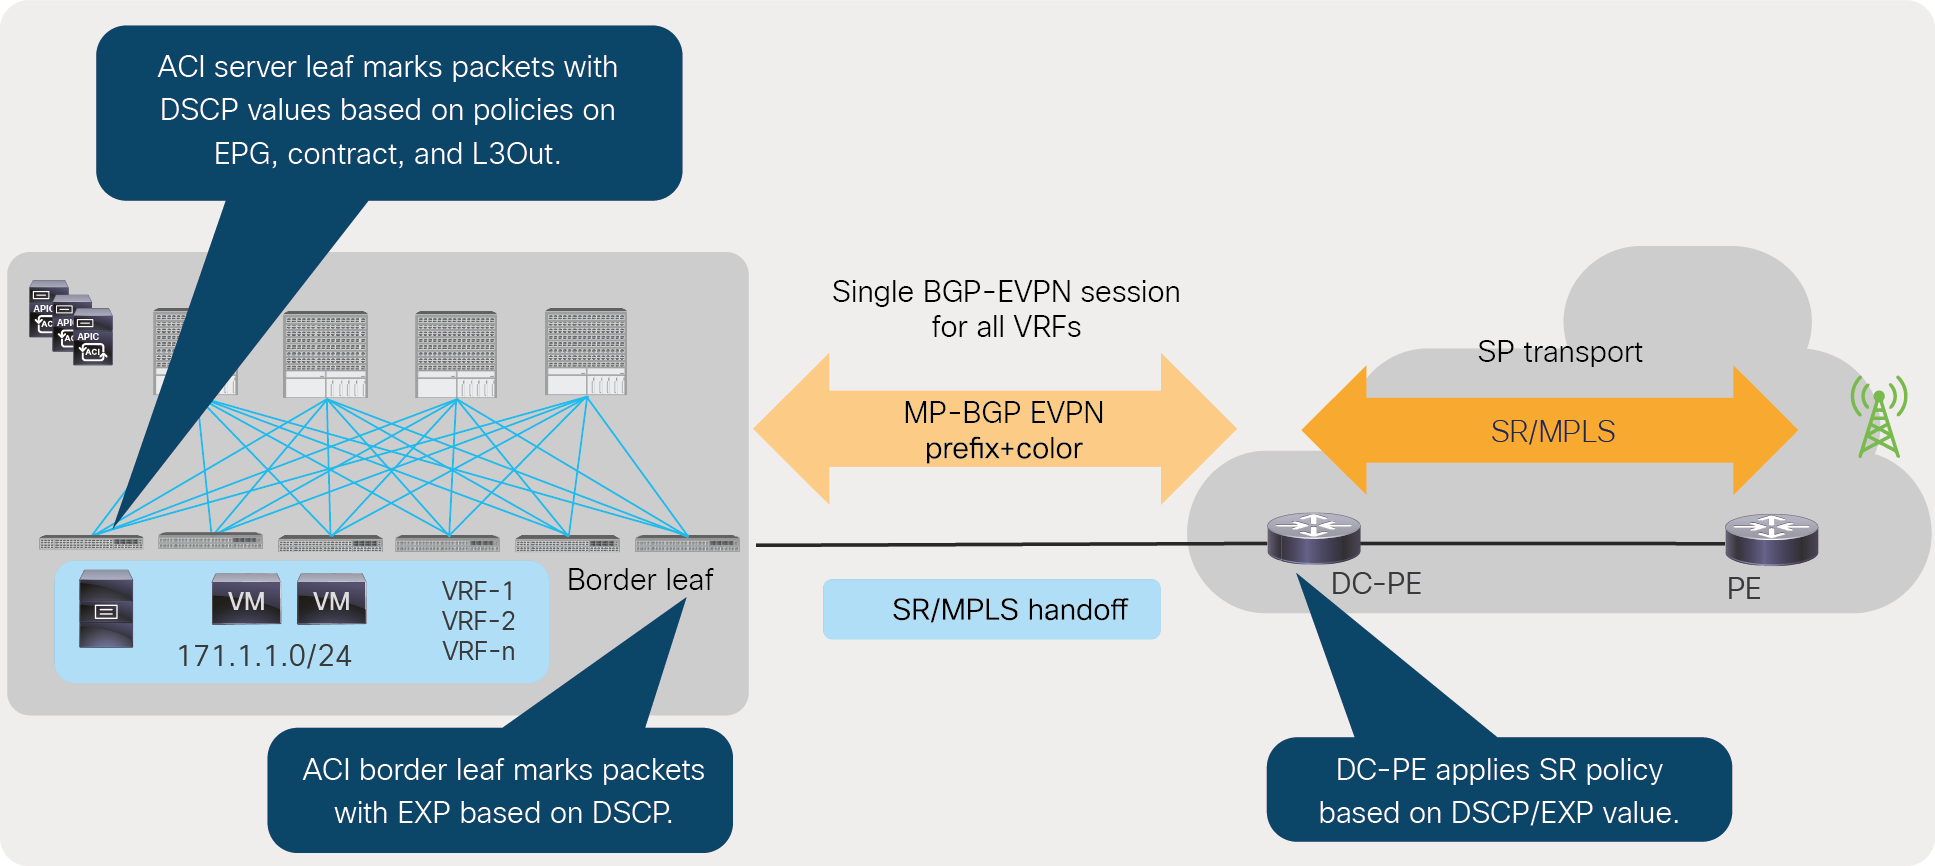 Consistent policy across the data center and SP transport using DSCP/EXP values set in the data center